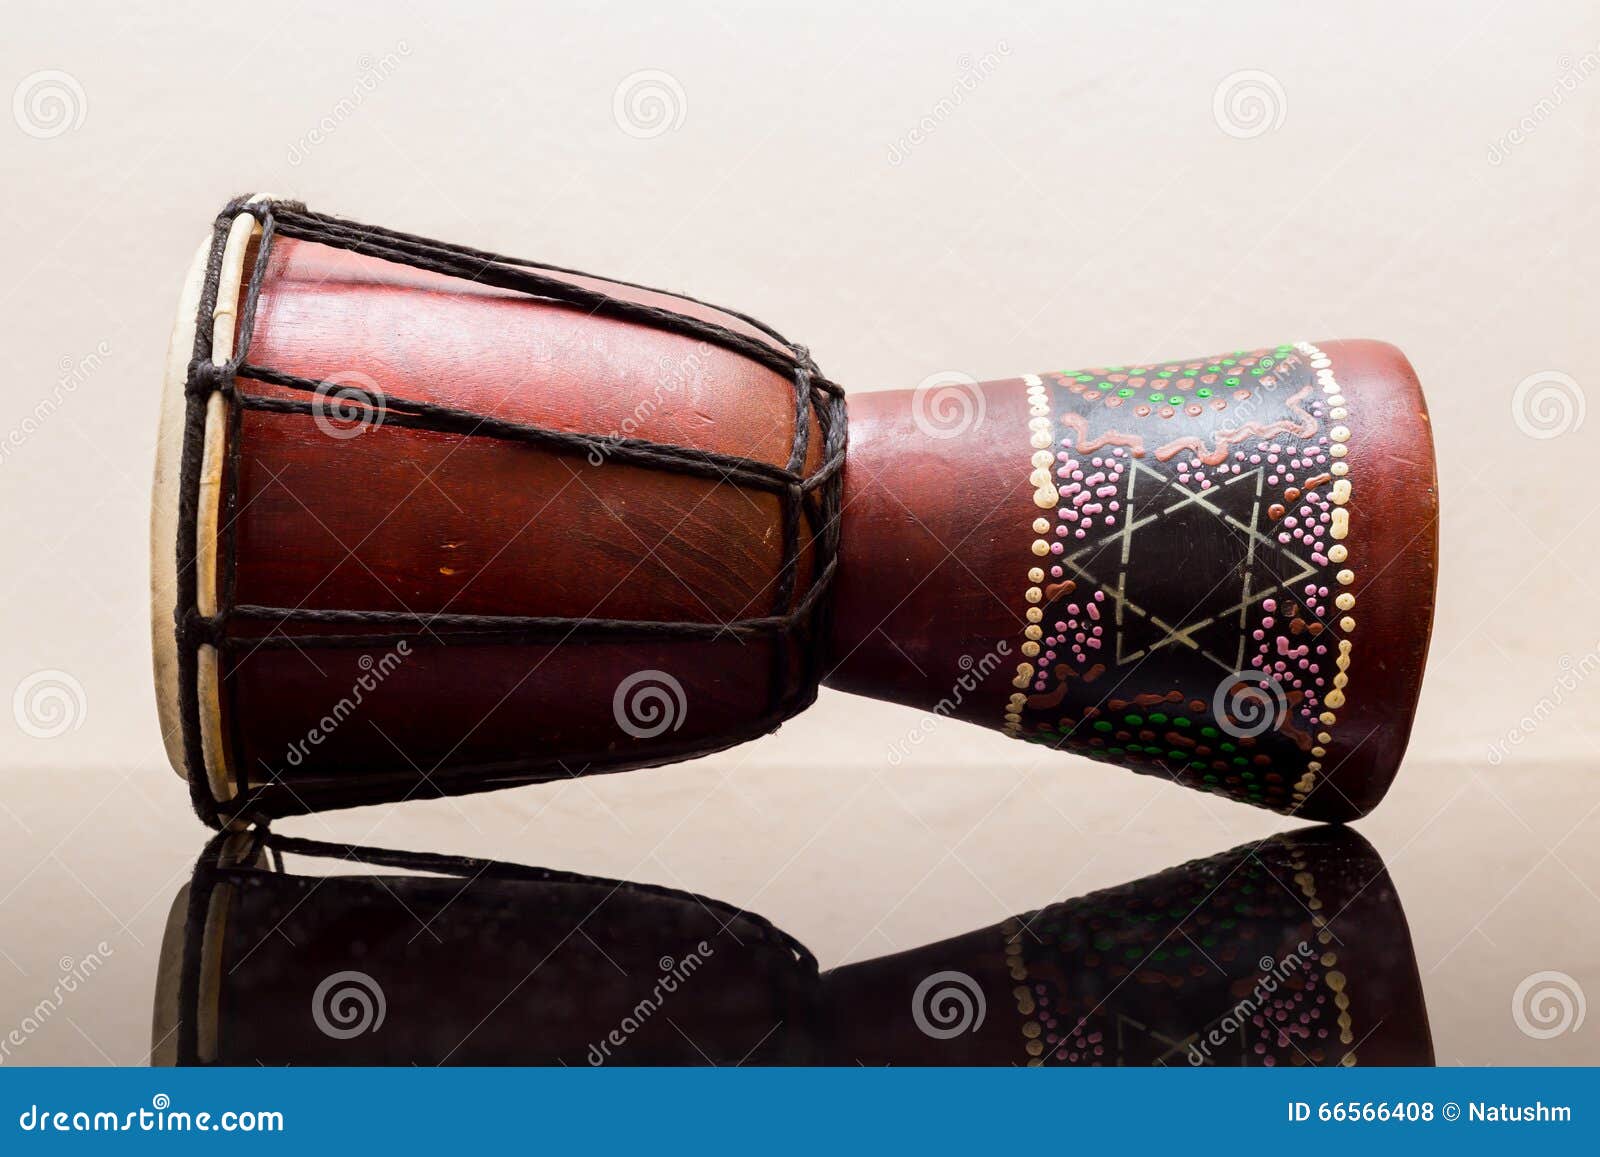 Darbouka Designed . Made of Wood Stock Photo - Image of instrument